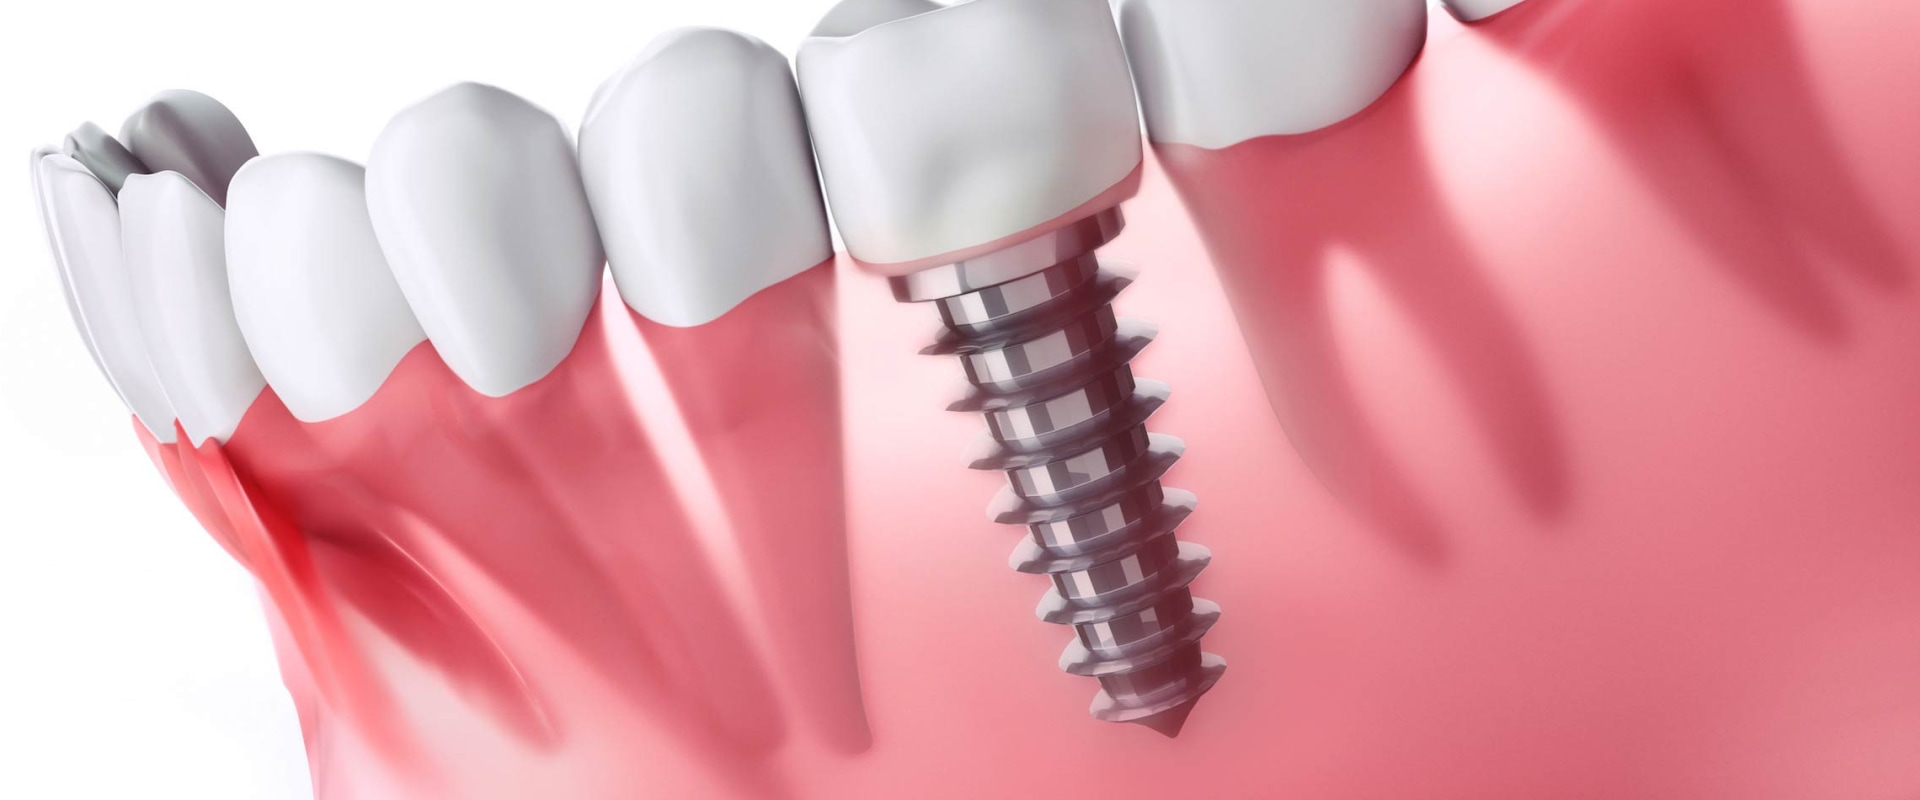 Where are dental implants done?